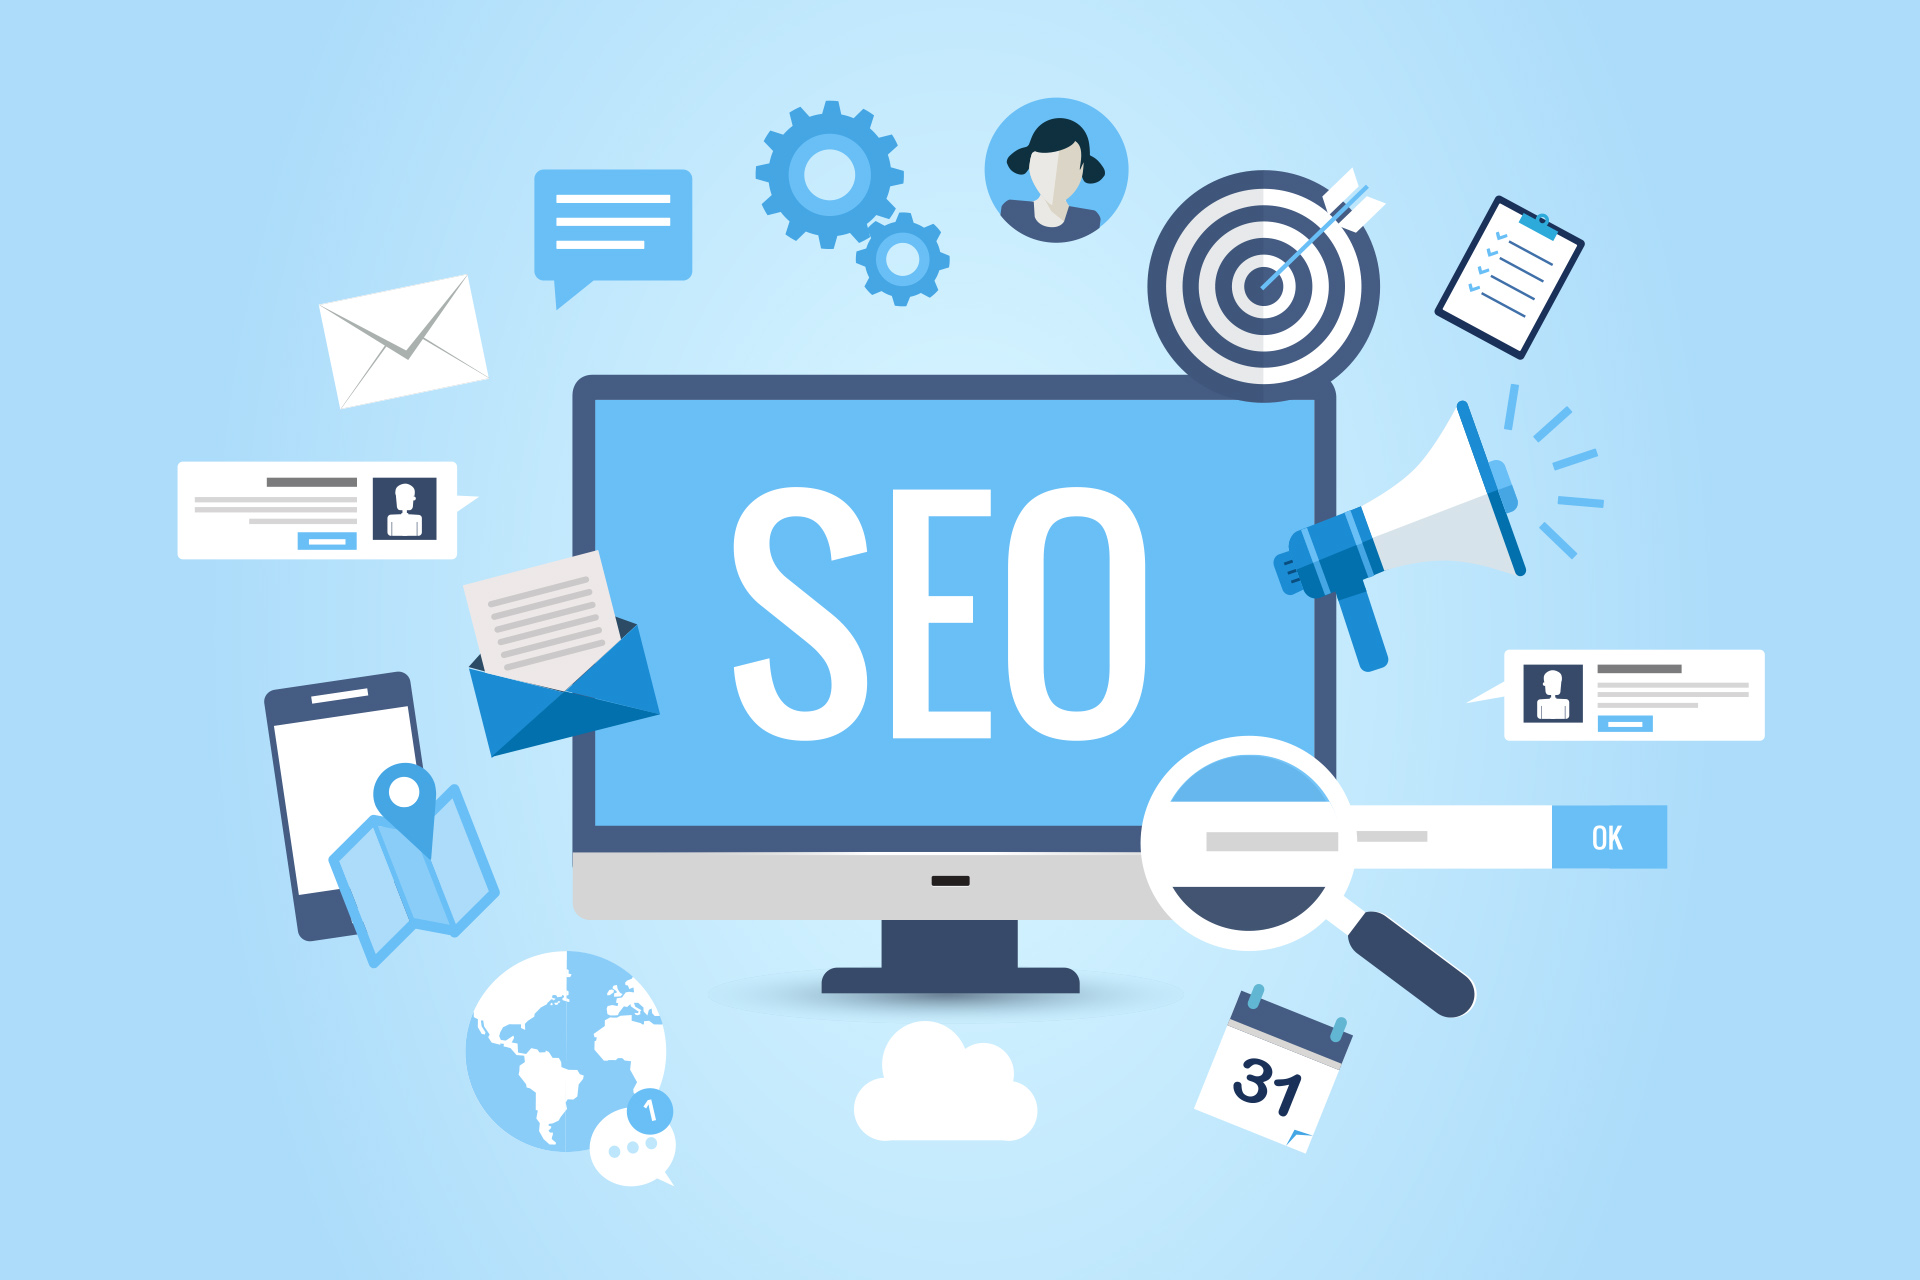 1 SEO - 6 Ways to Improve your Blog Ranking on Search Engines